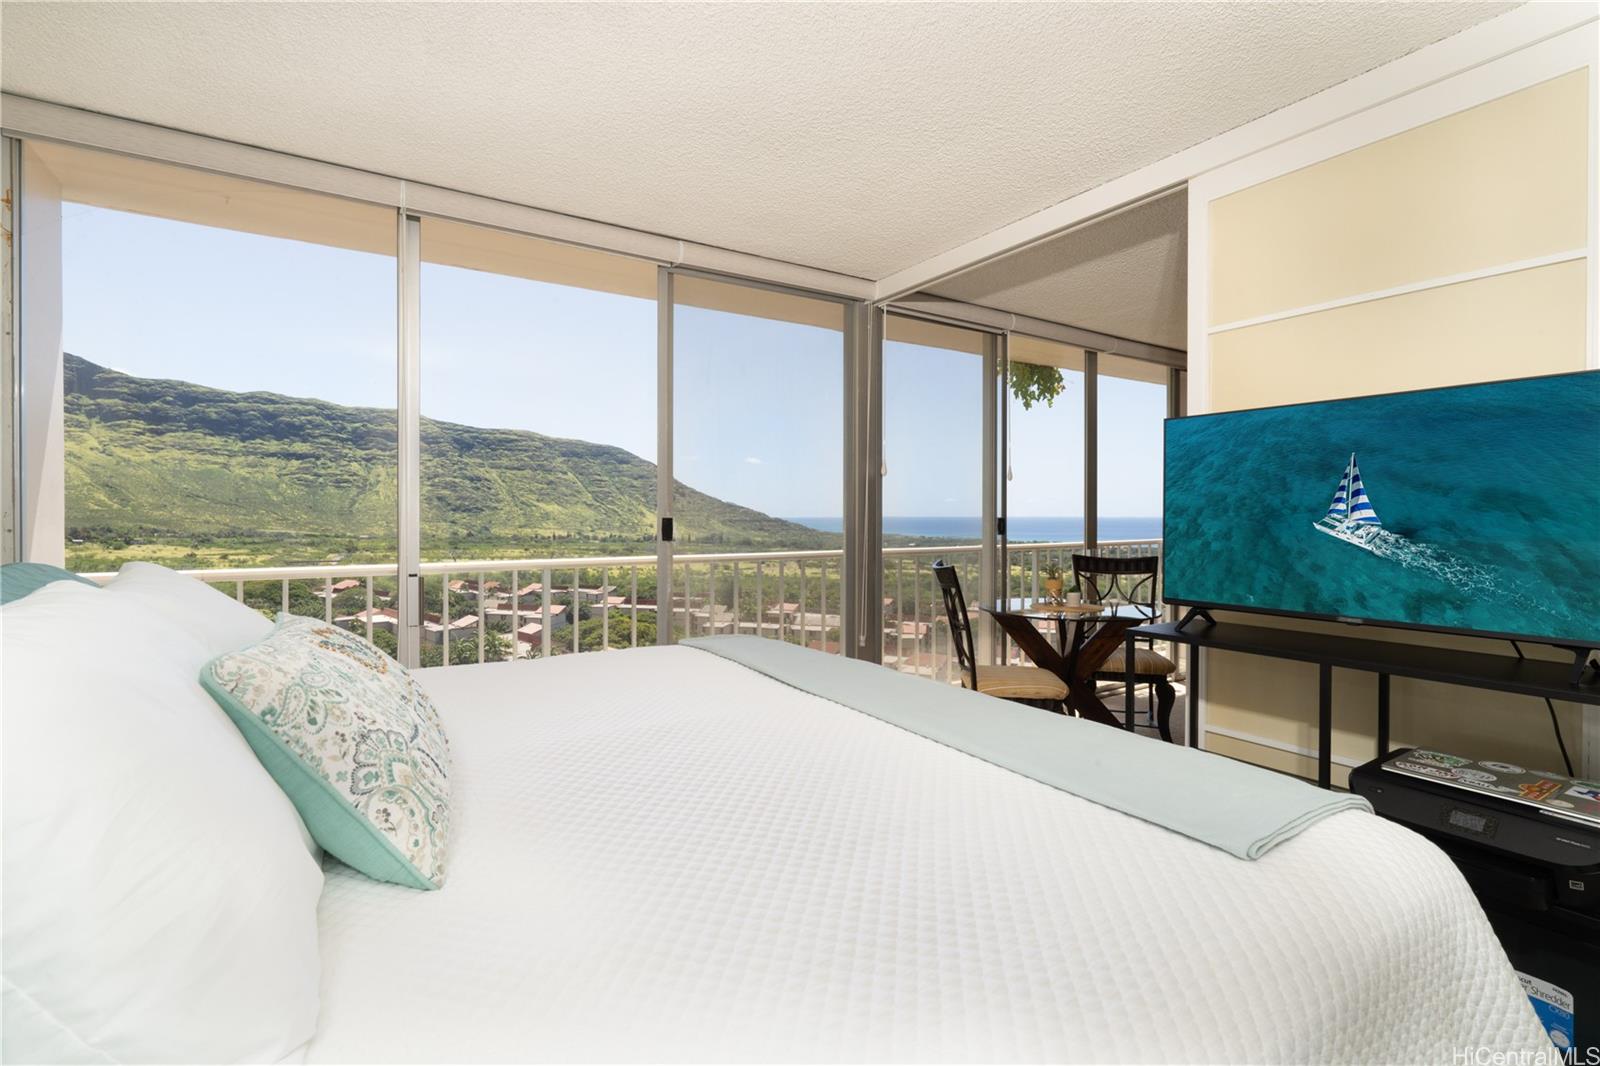 Wake up to this view?  yes please!